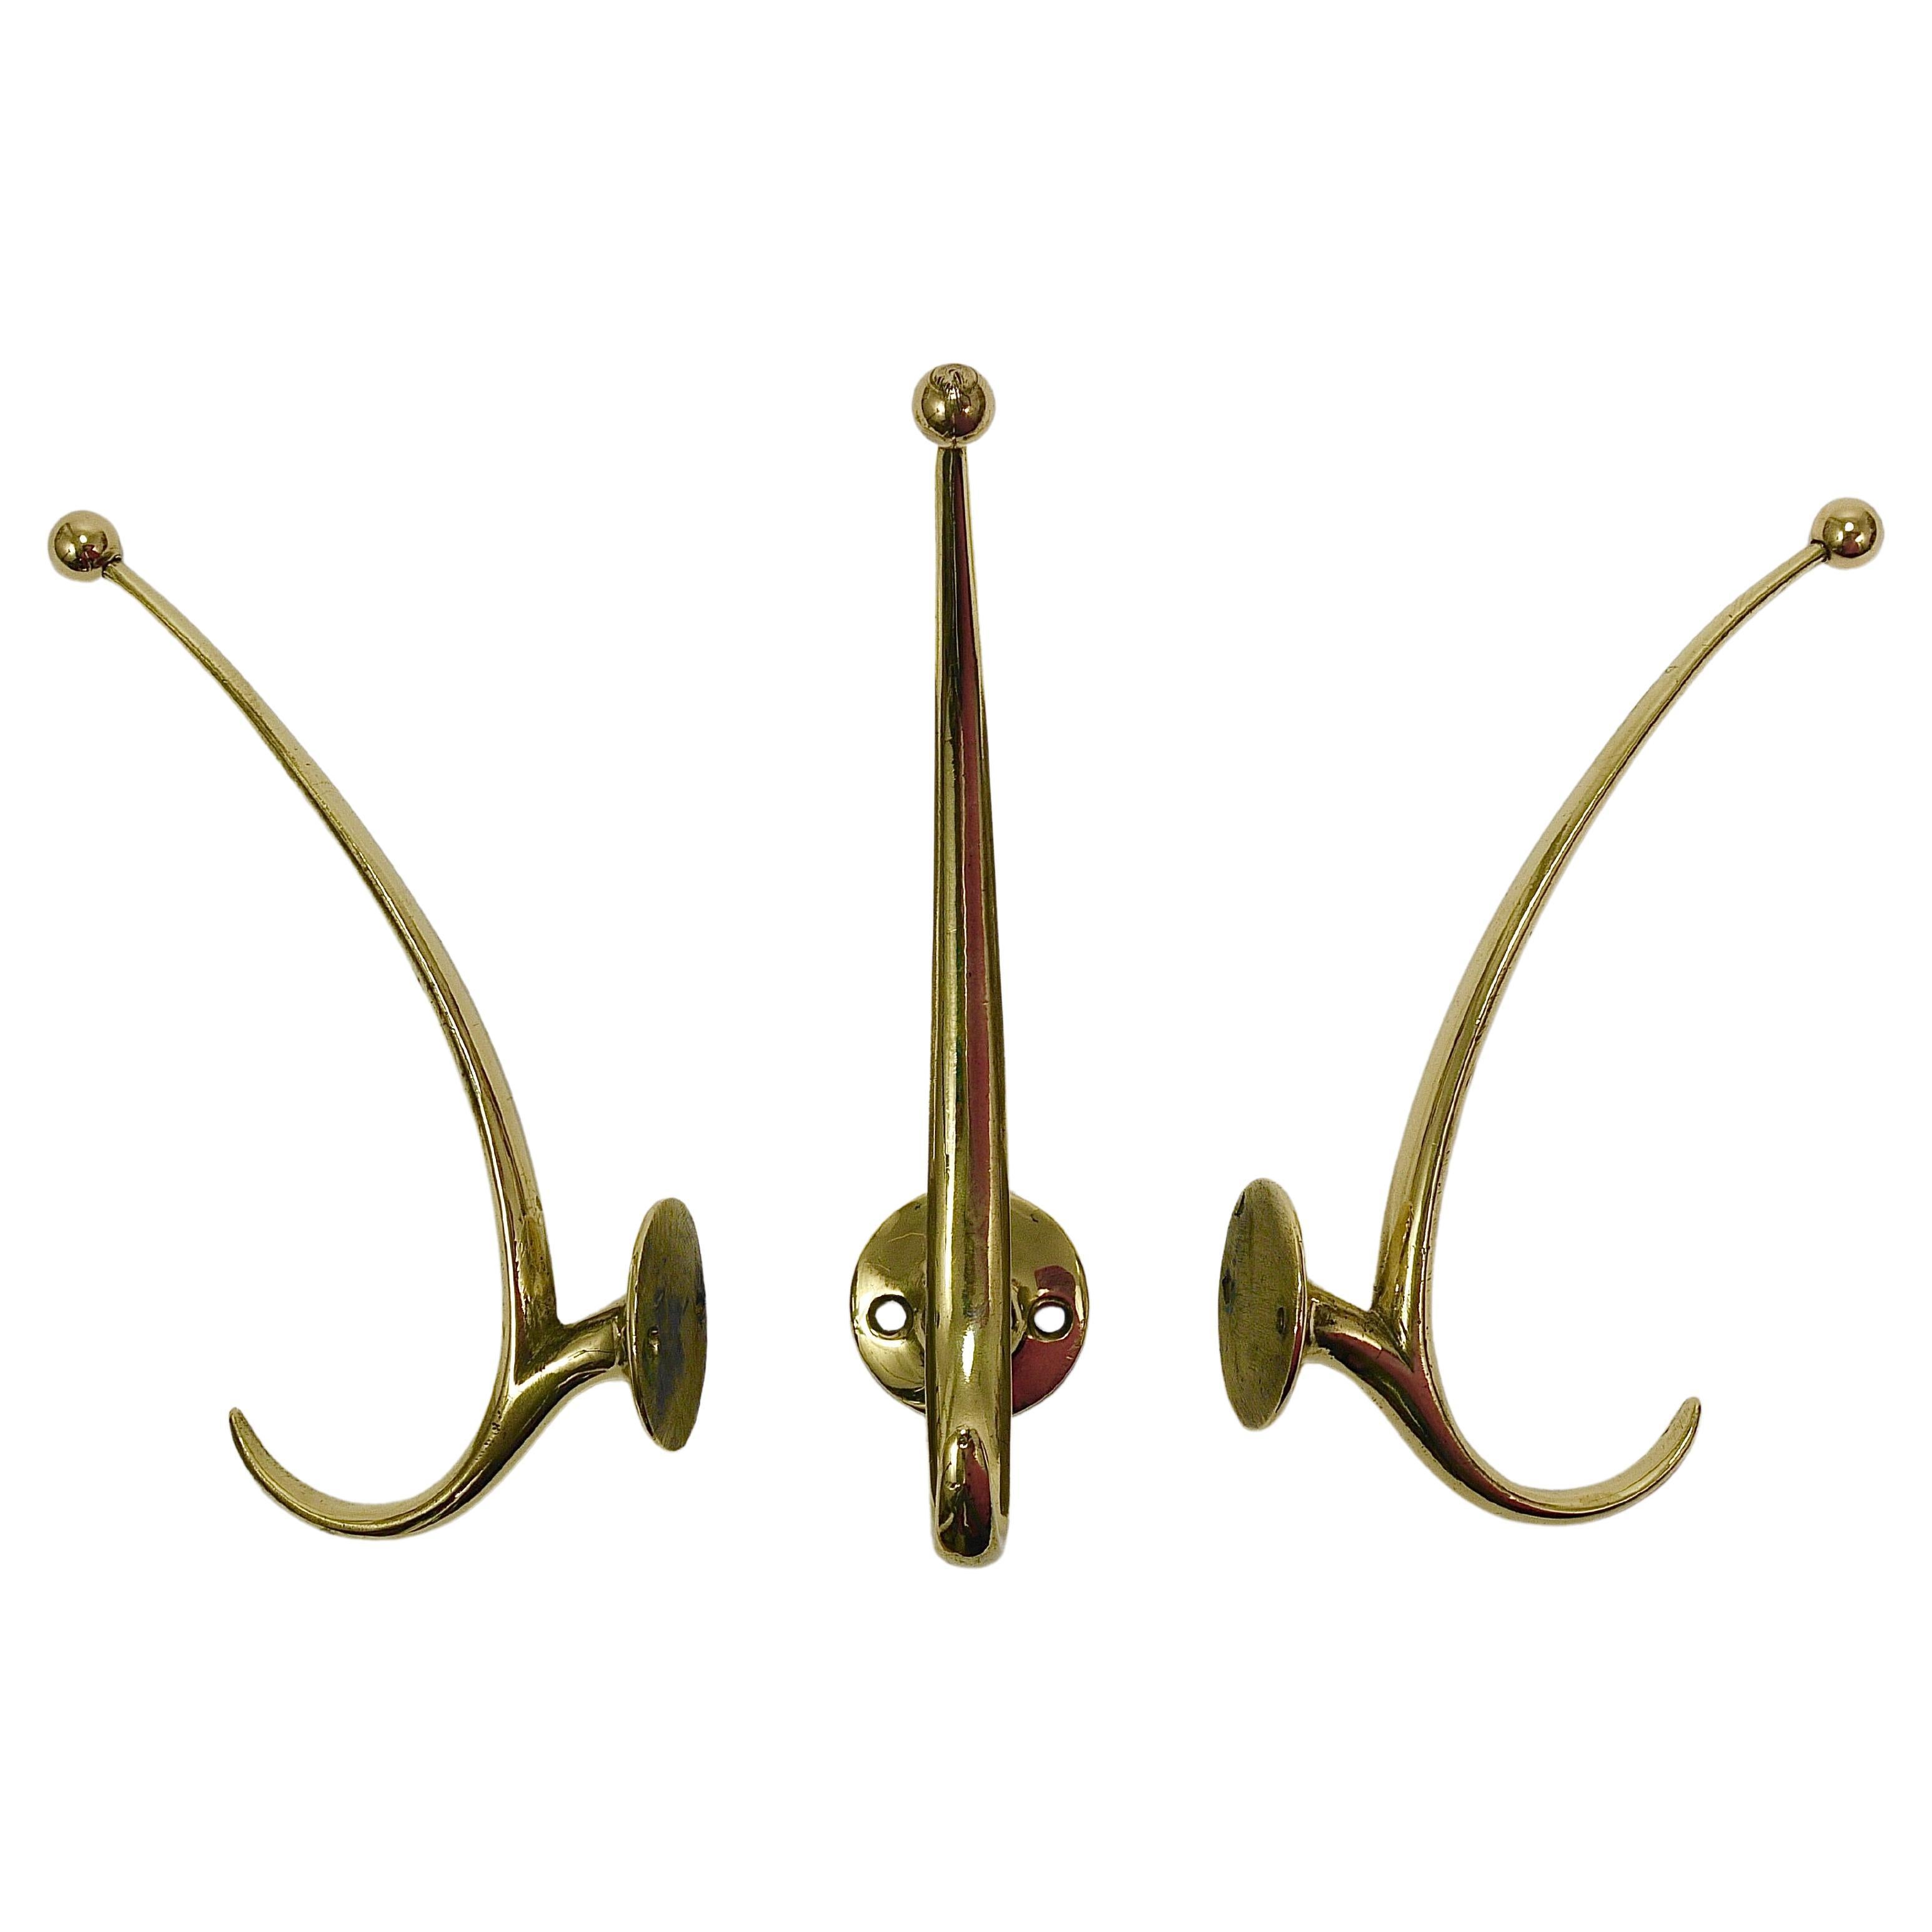 Six Franz Hagenauer Vienna Mid-Century Curved Brass Wall Coat Hooks, 1950s For Sale